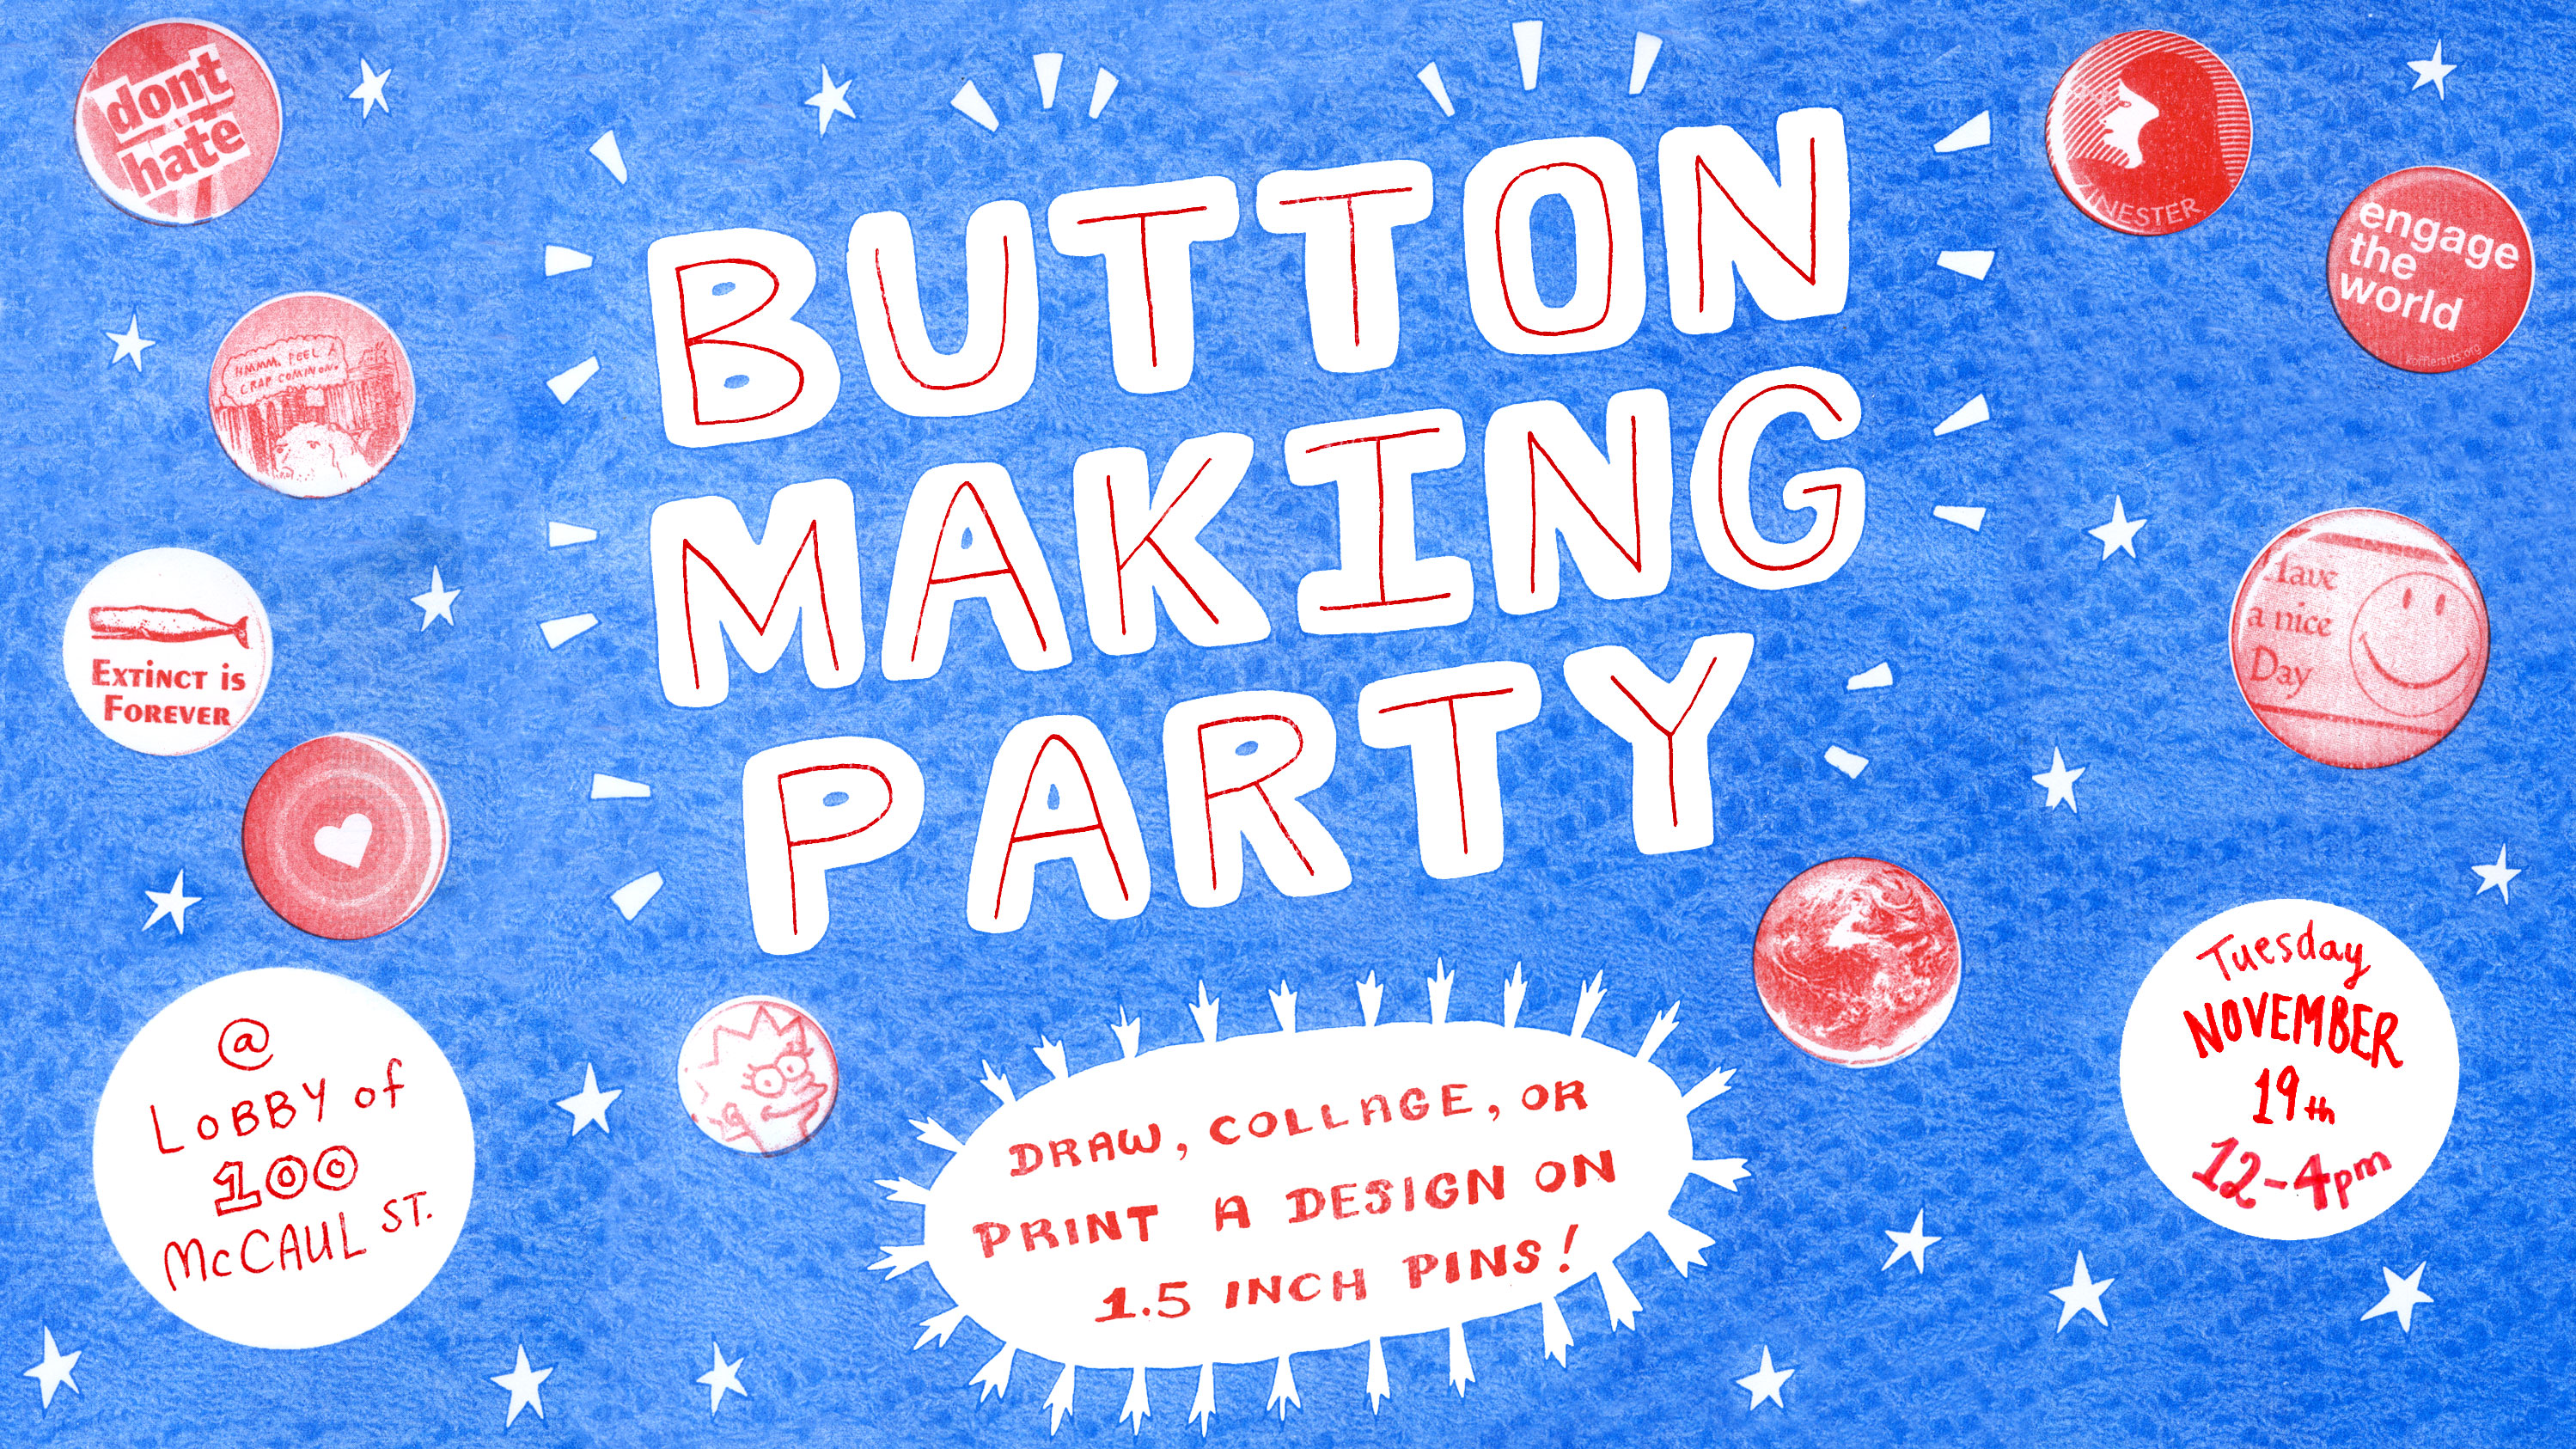 Floating, glowing hand drawn letters with the text "Button making party"